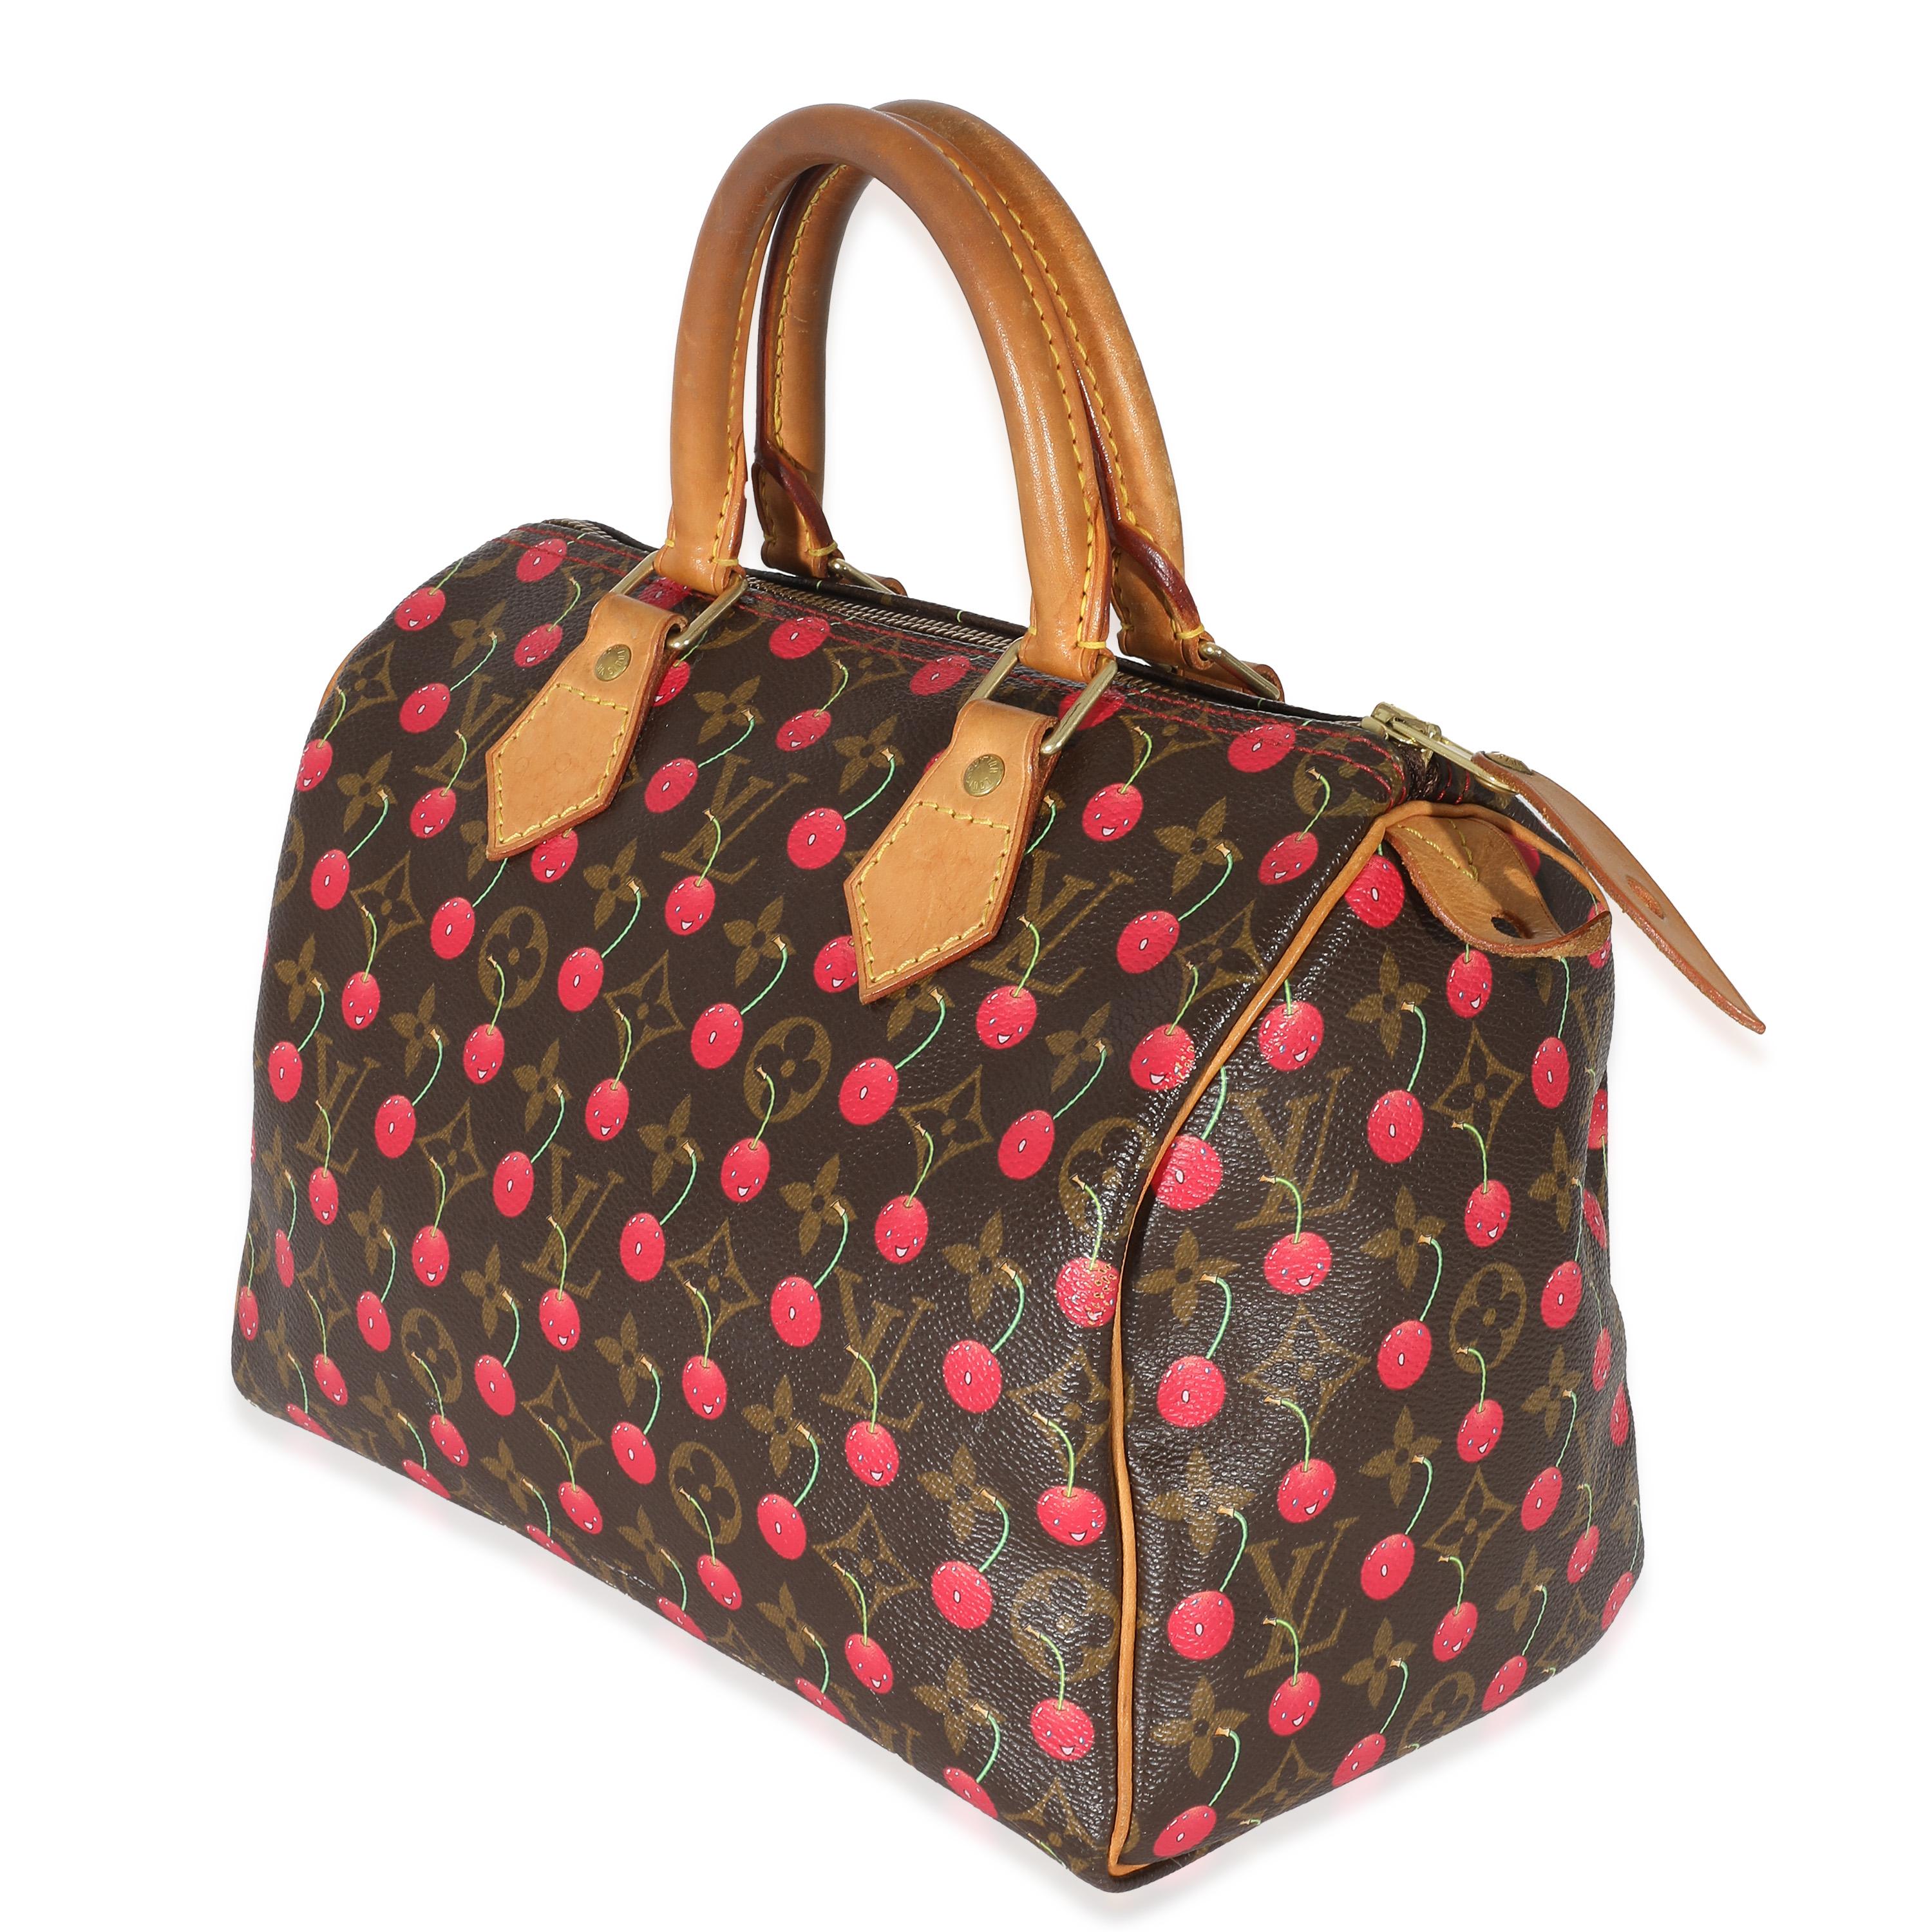 Louis Vuitton x Takashi Murakami Cerises Monogram Canvas Speedy 25 In Excellent Condition For Sale In New York, NY